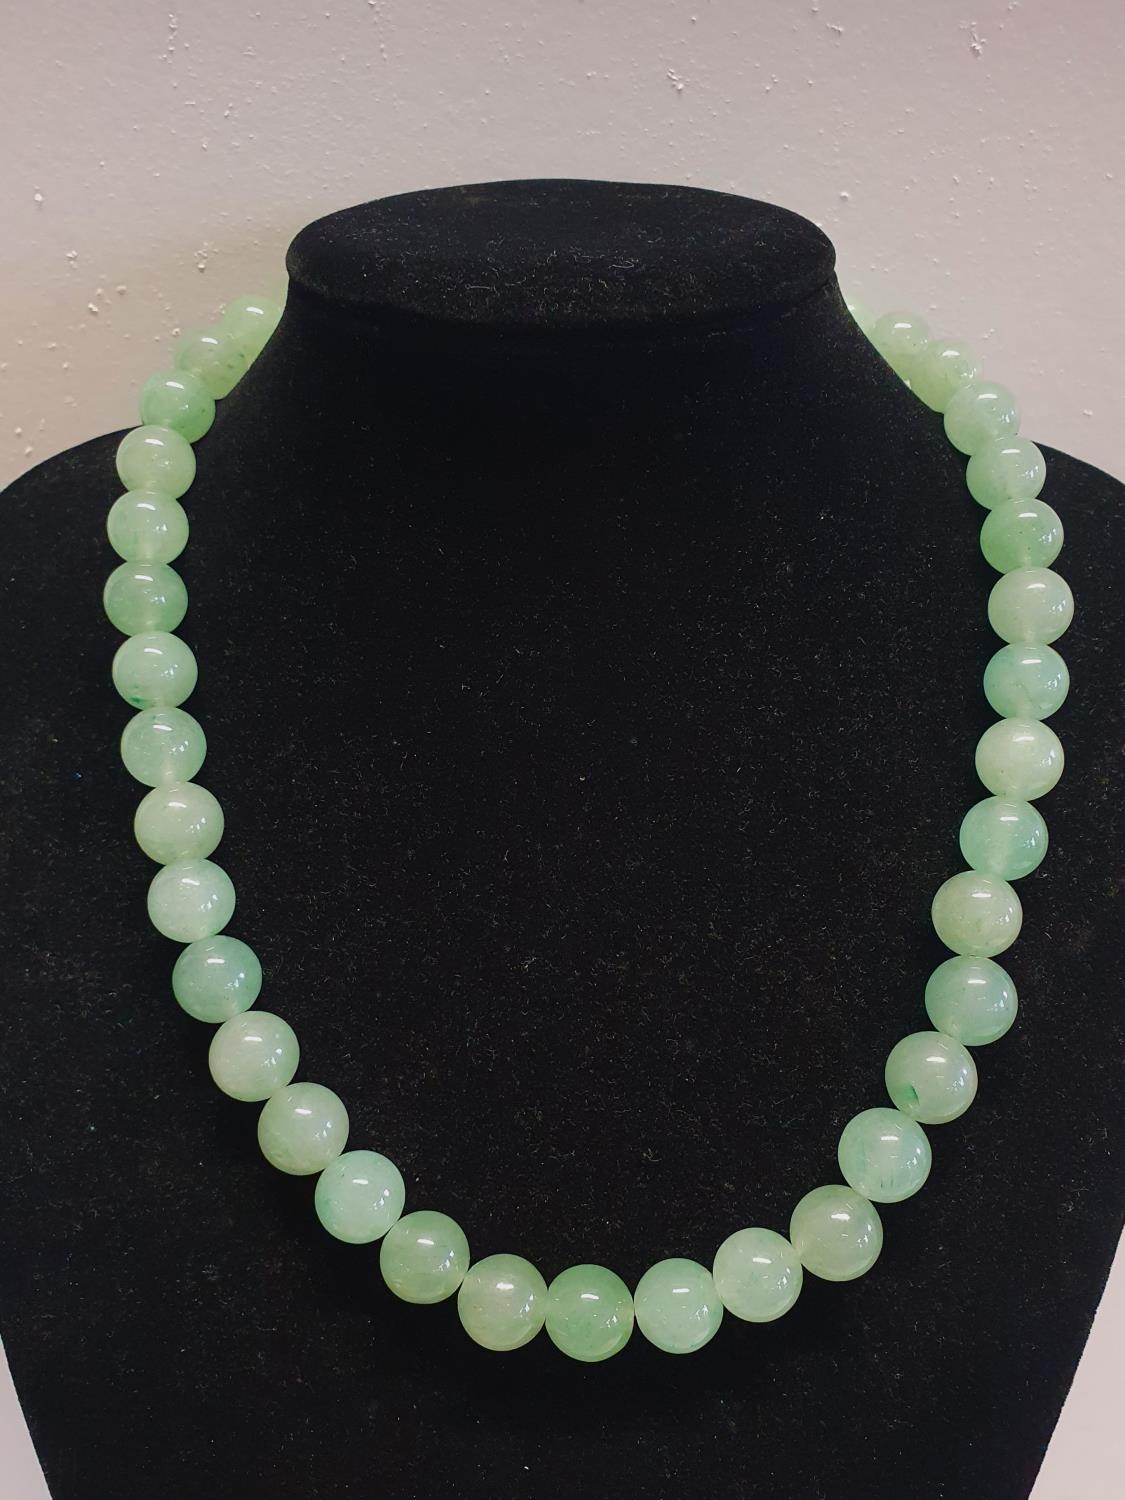 A green bead necklace possible Jade?